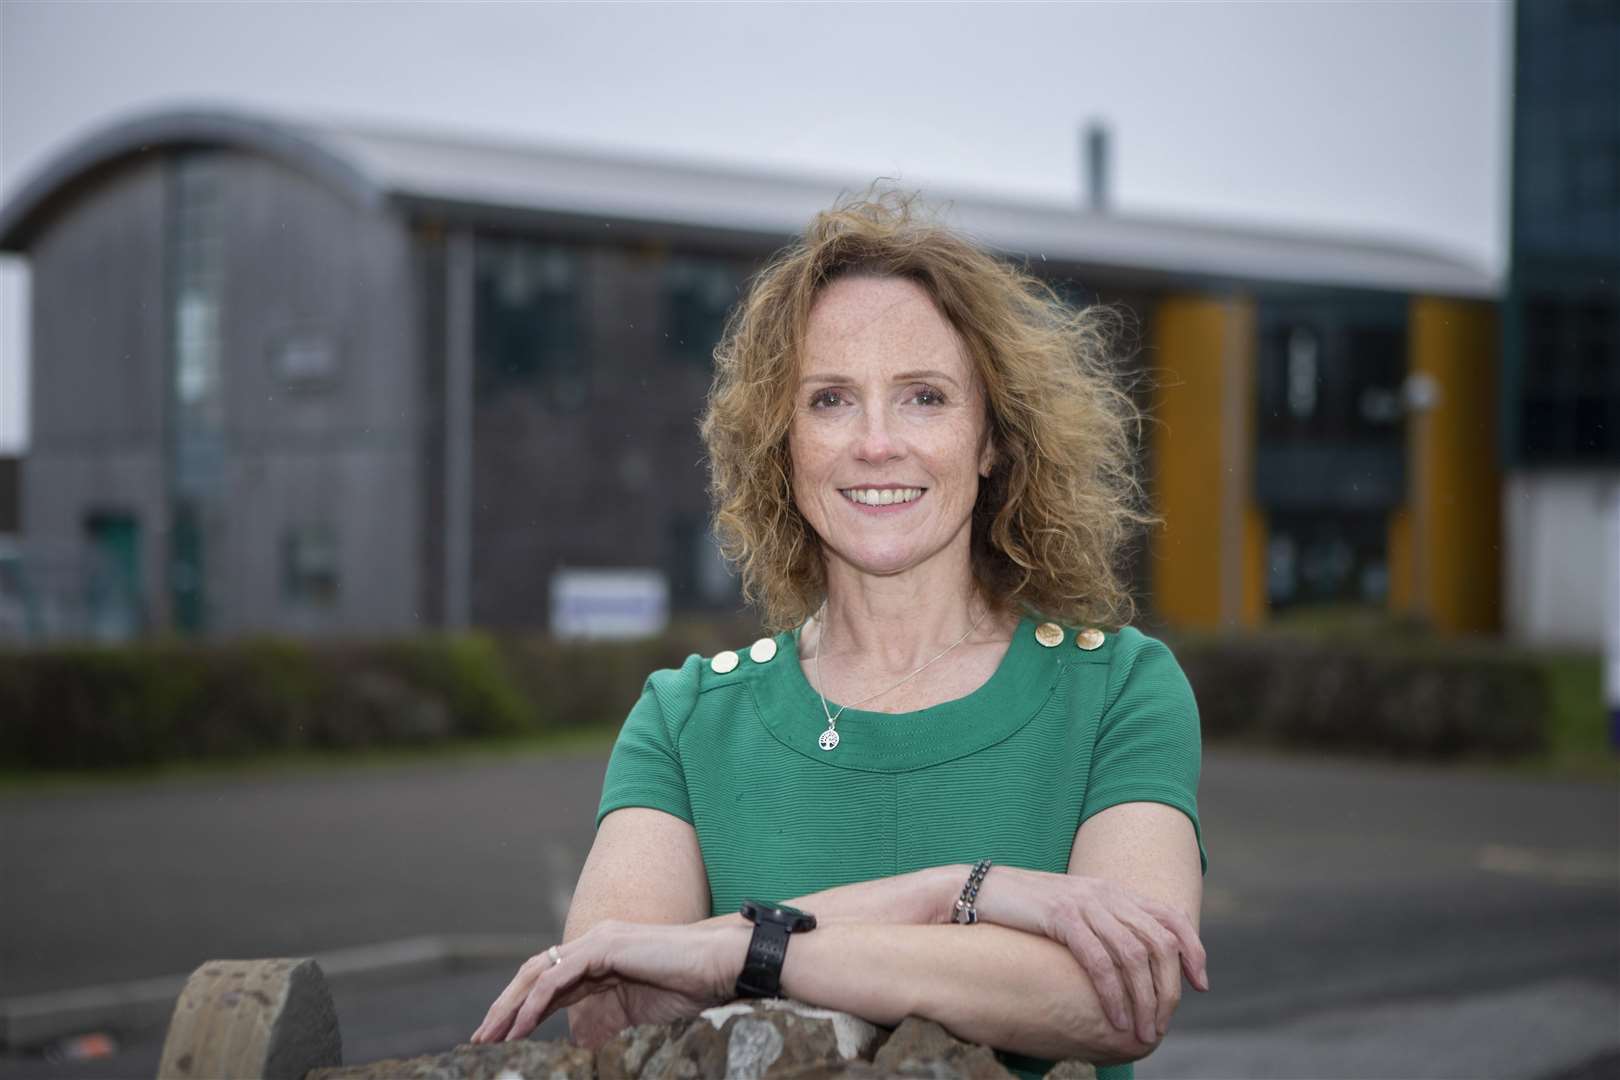 North Highland College UHI principal Debbie Murray says the Flexible Workforce Development Fund is a great way to support a range of training opportunities.